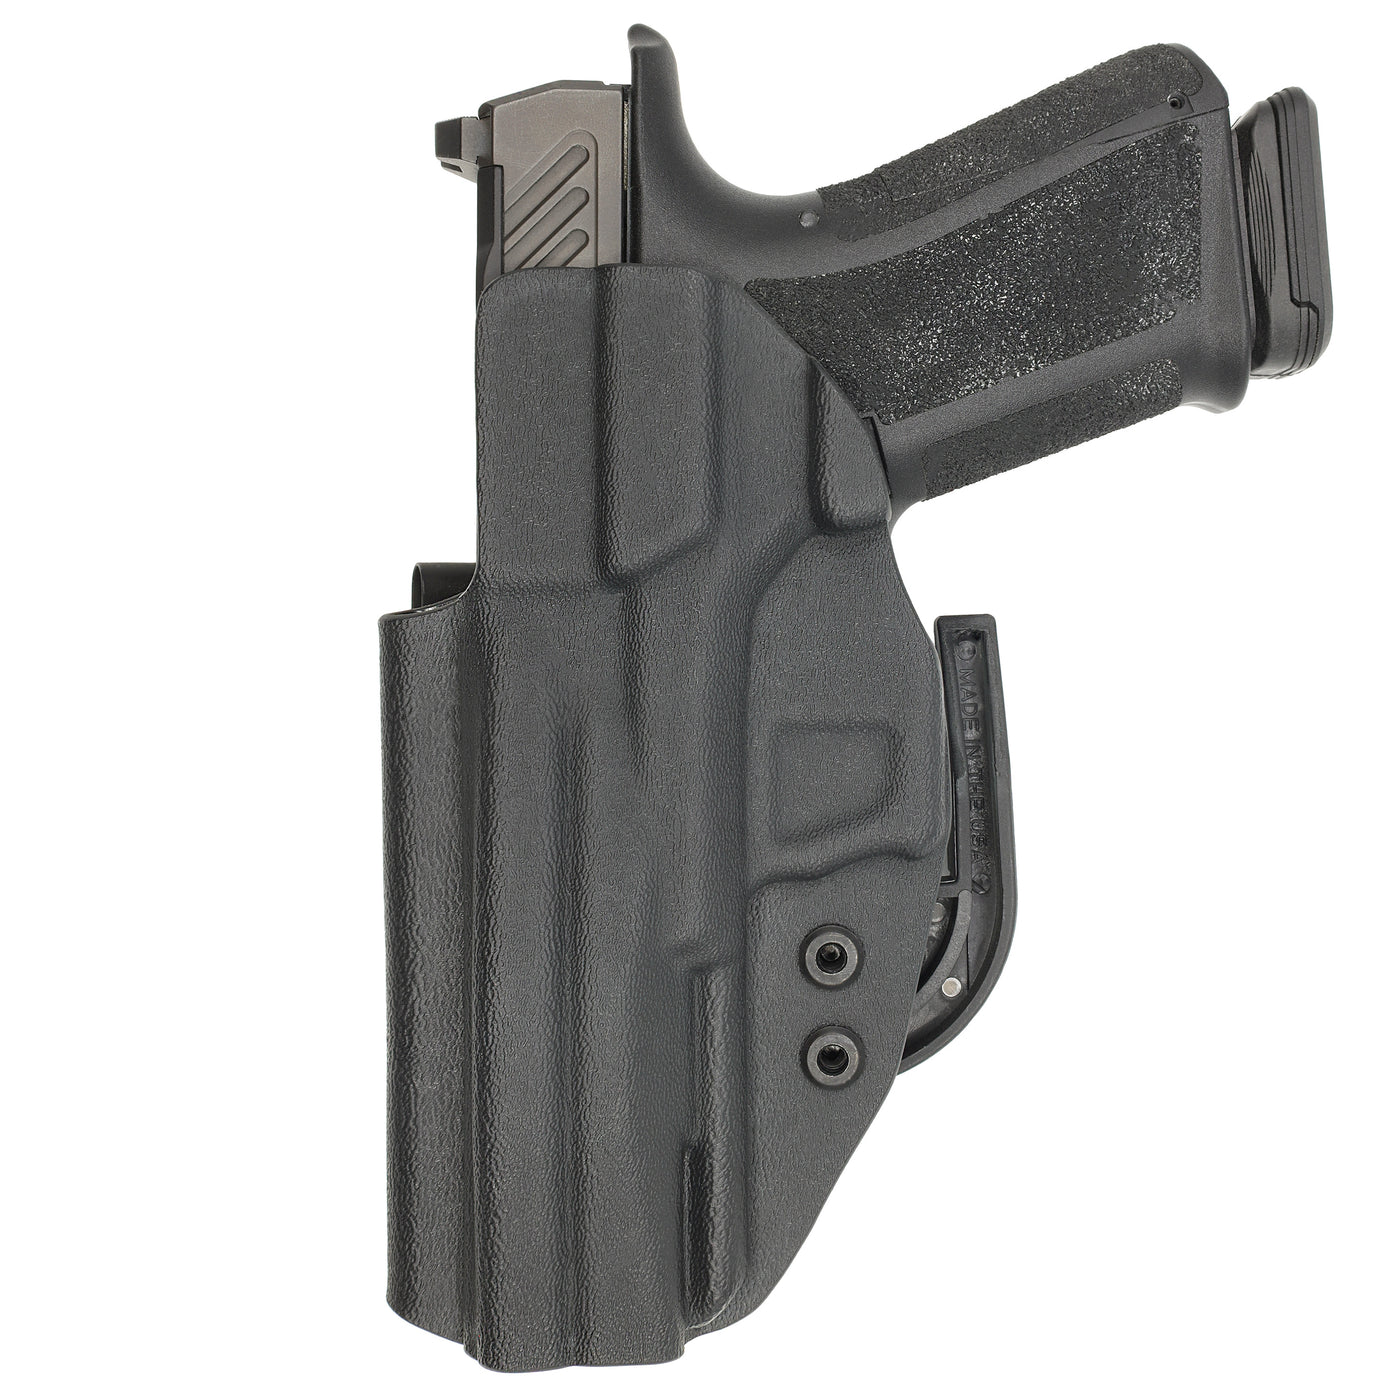 C&G Holsters Quickship IWB ALPHA UPGRADE Covert Shadow Systems DR920 holstered back view